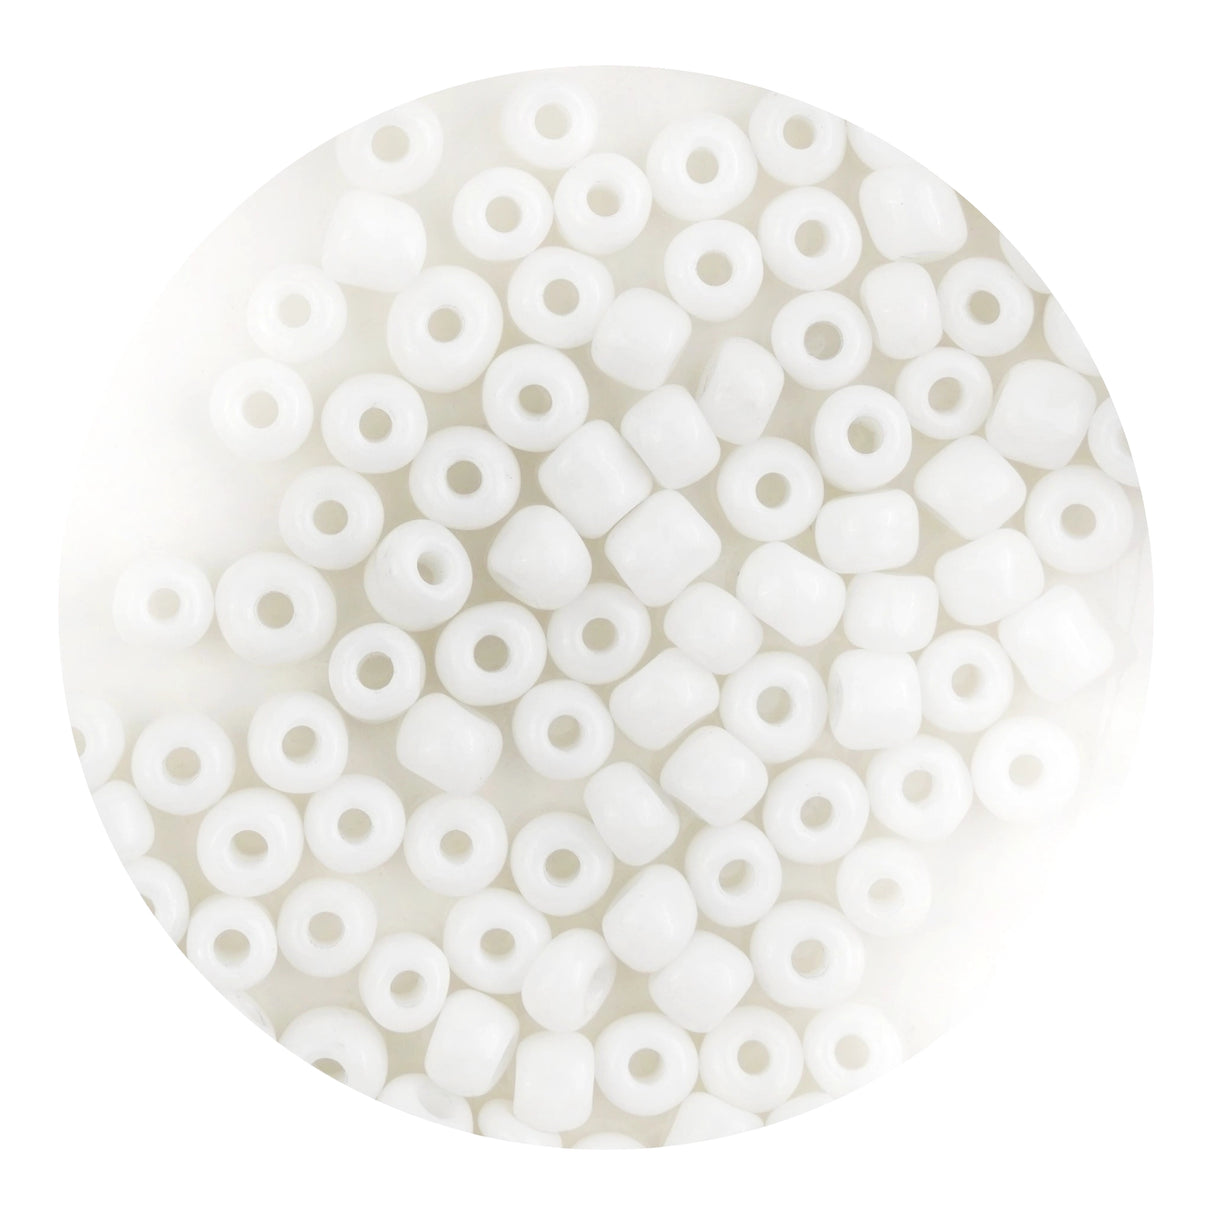 Glass Seed String Beads - White